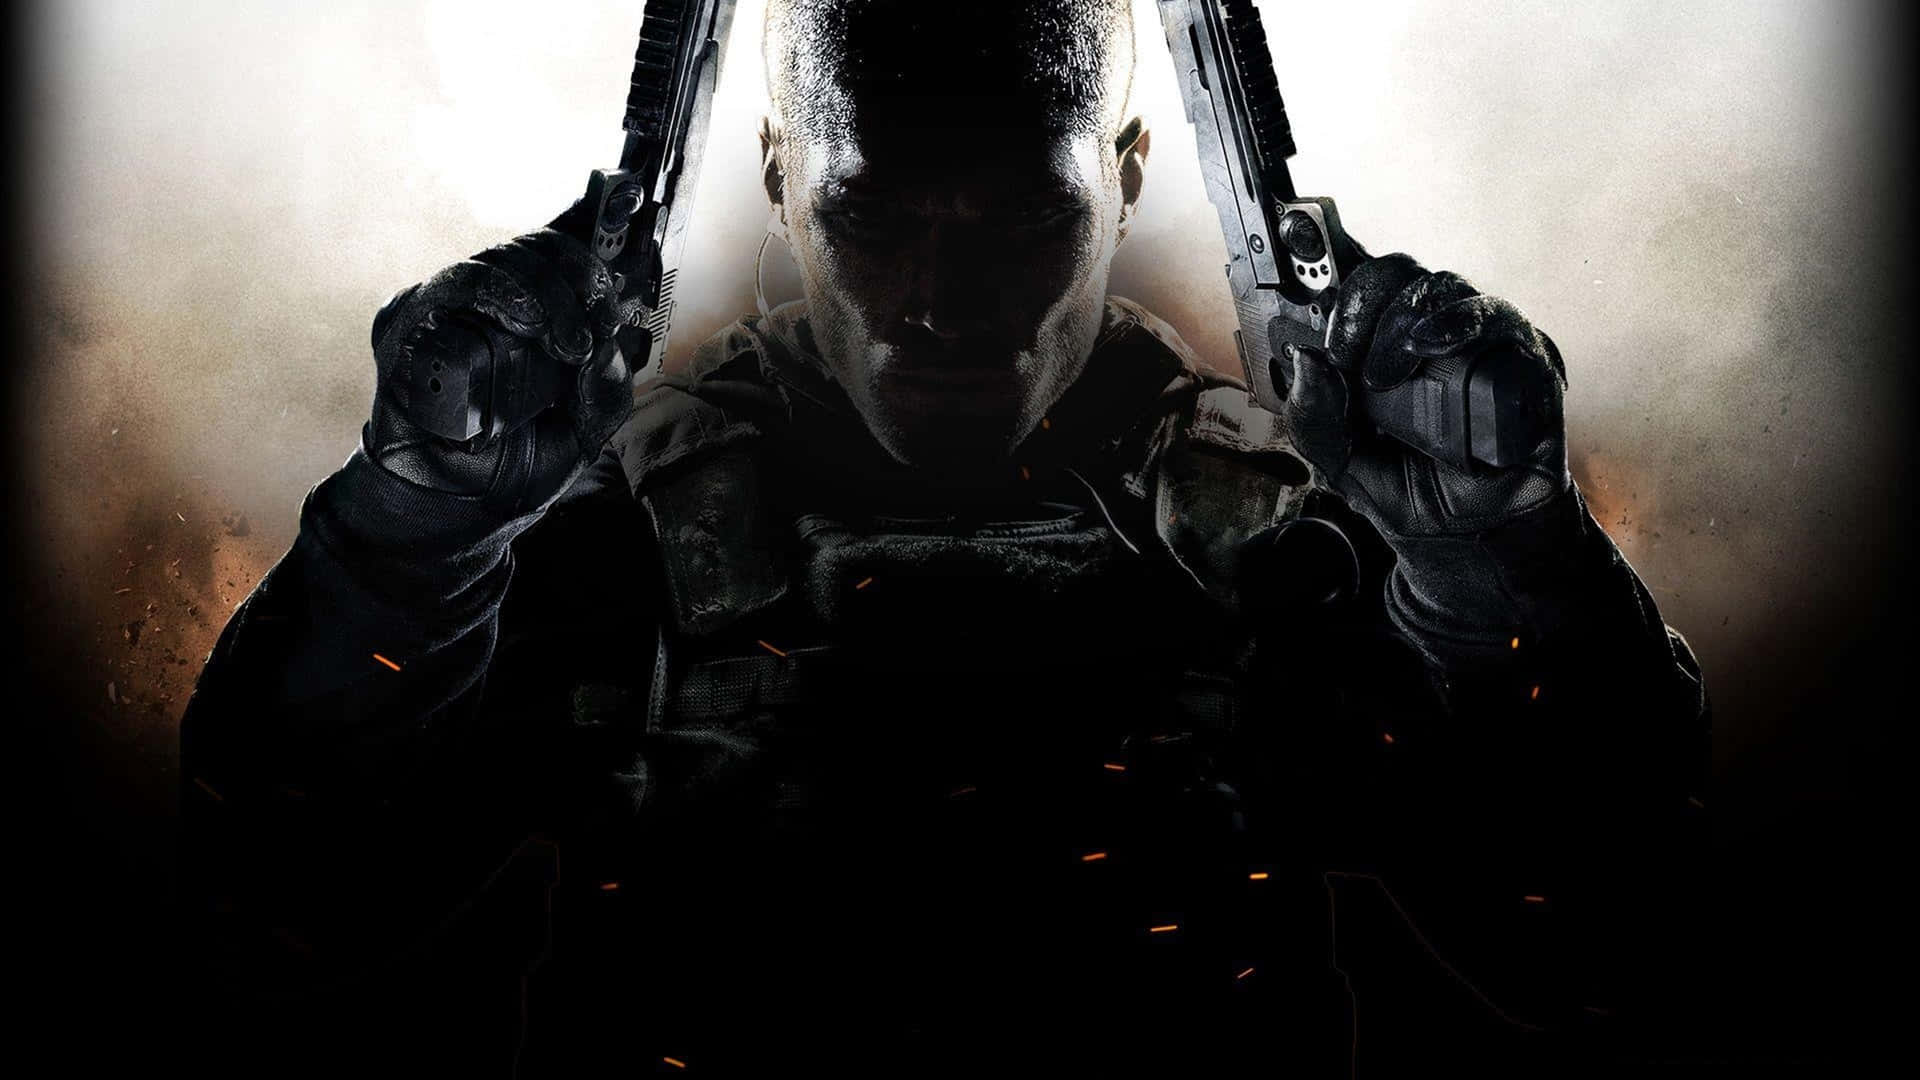 Free Call Of Duty Wallpaper Downloads, [300+] Call Of Duty Wallpapers for  FREE 